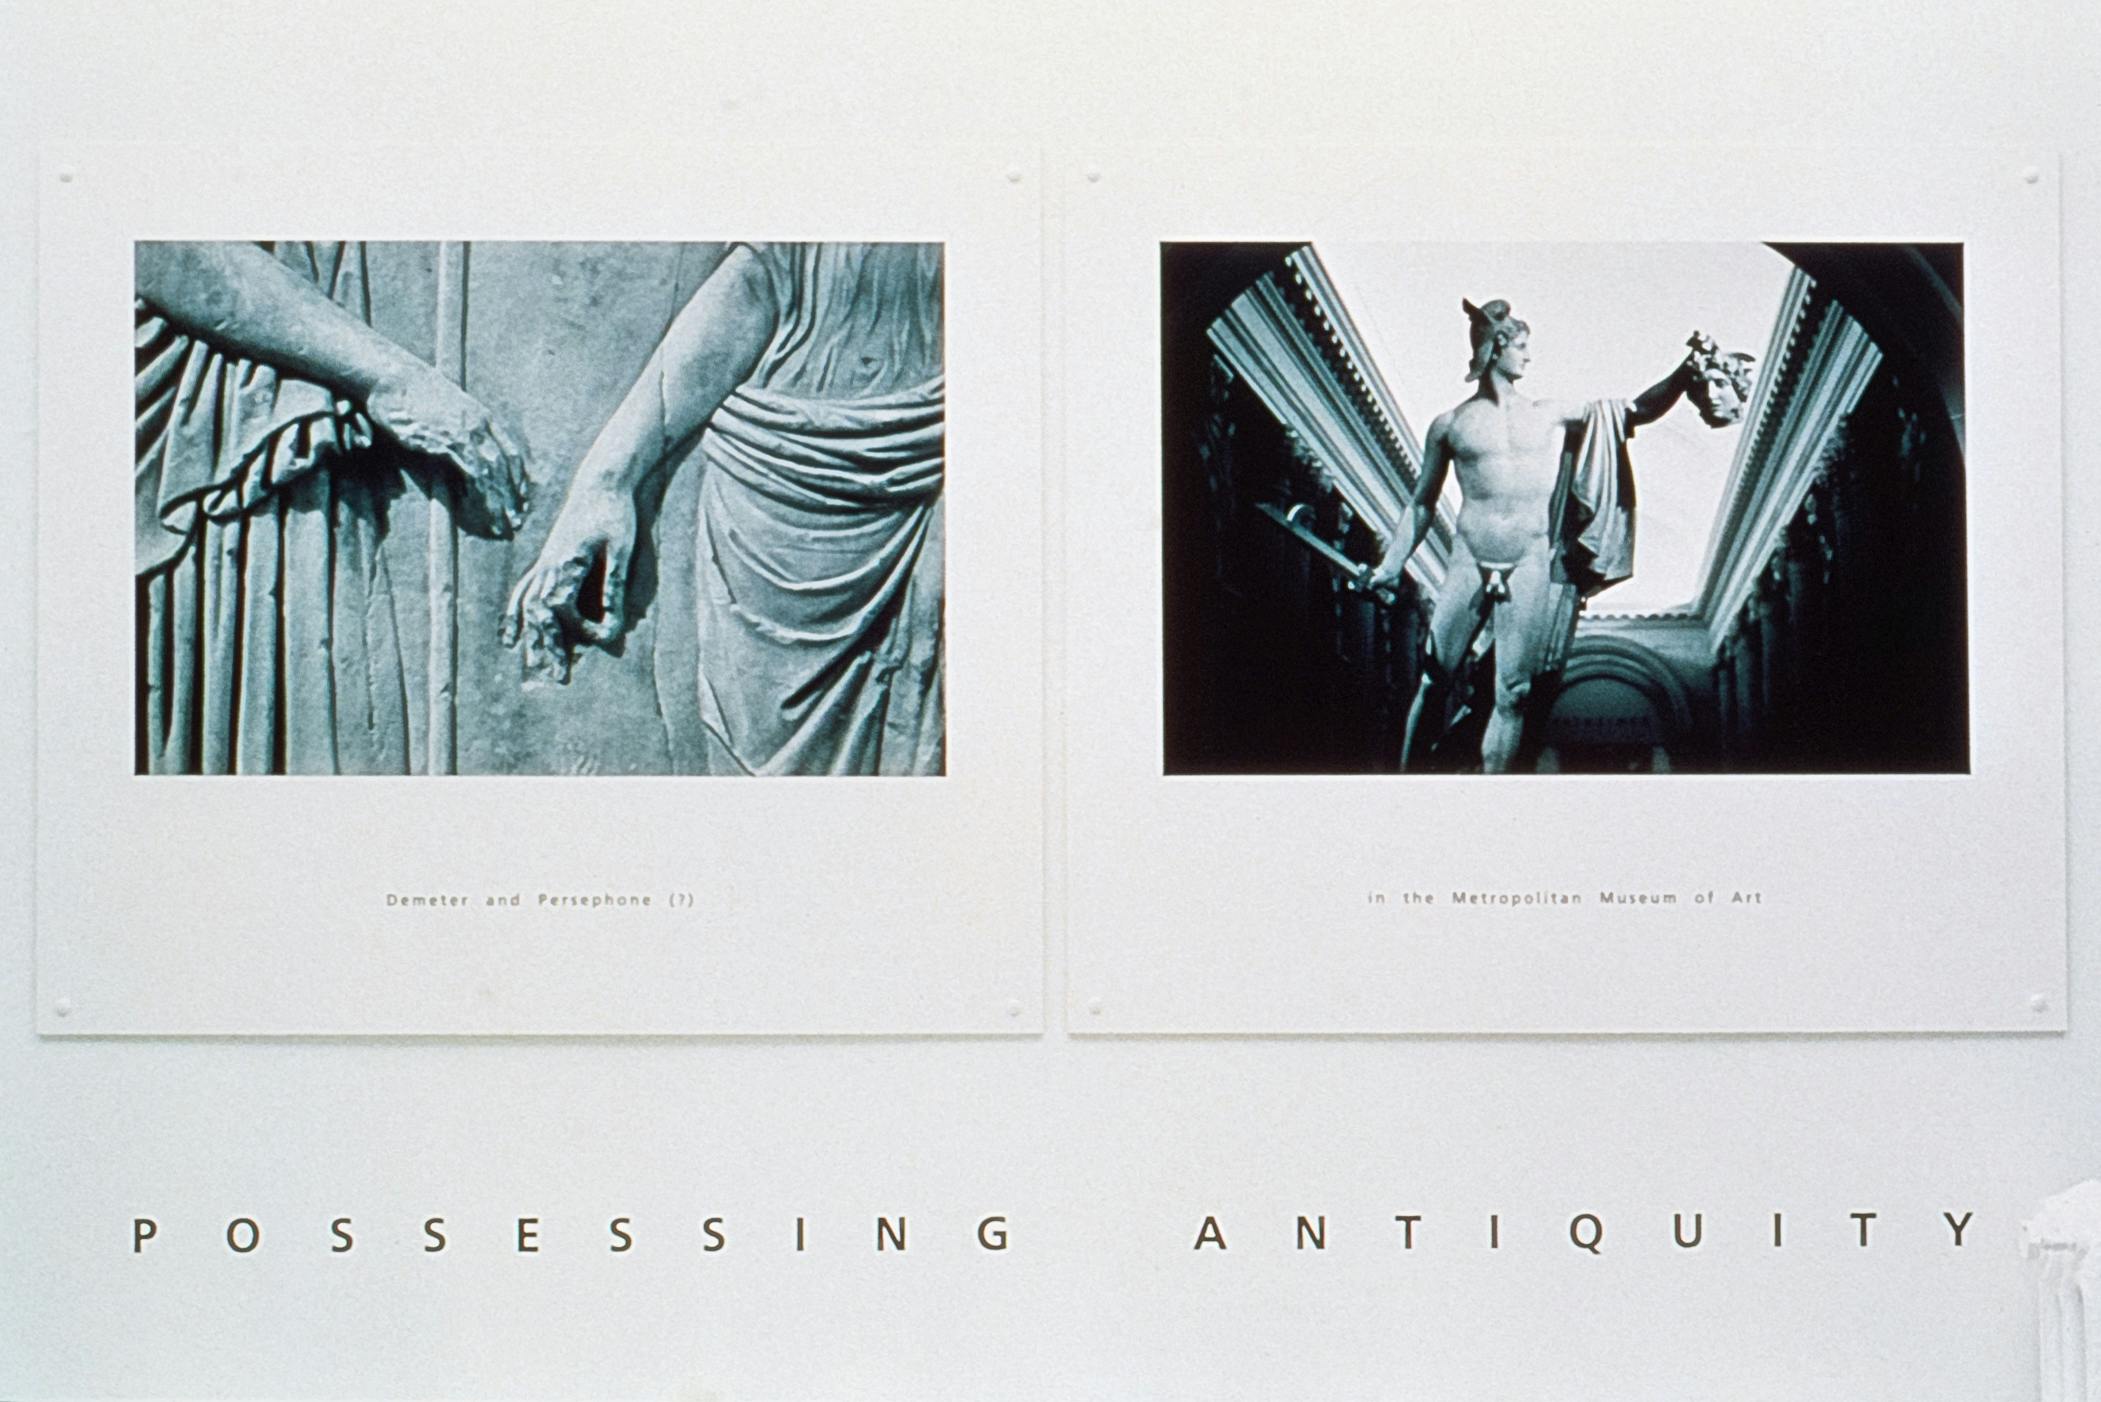 Two black and white prints pinned to a gallery wall. The prints show images of marble status with small printed text below. Beneath the image there is text that reads “POSSESSING ANTIQUITY.” 